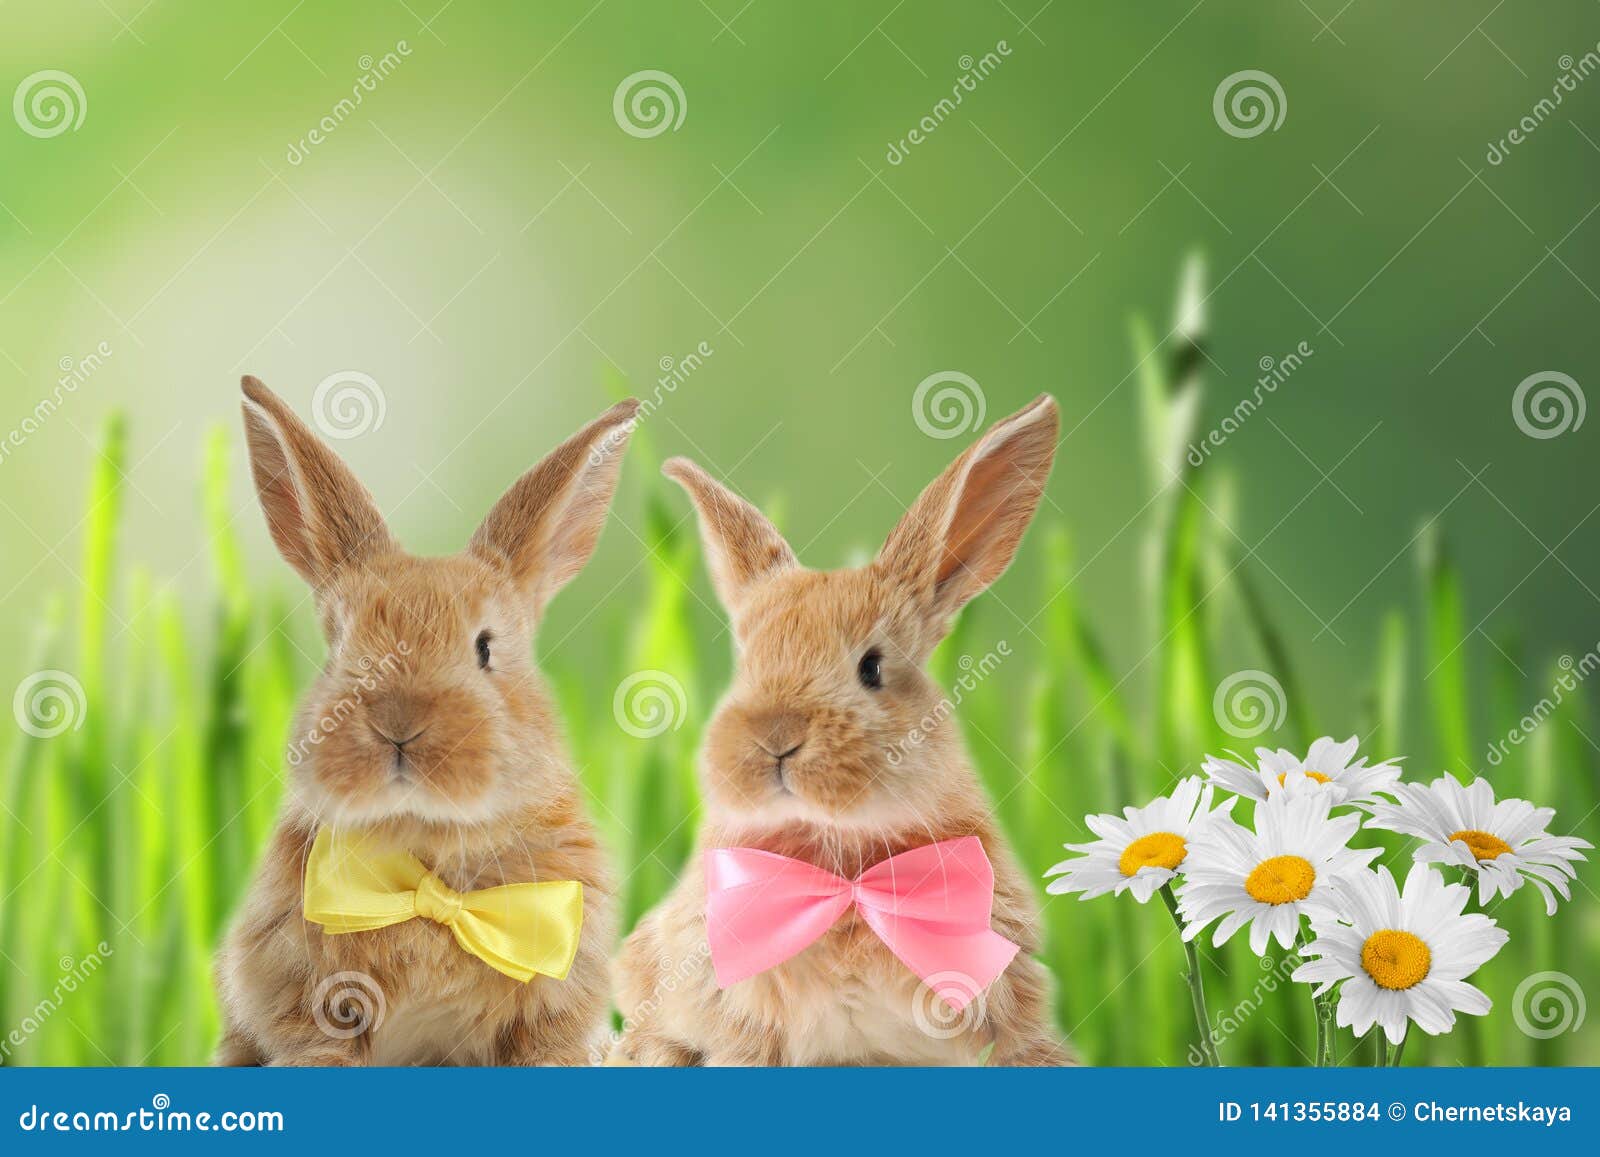 adorable furry easter bunnies with cute bow ties